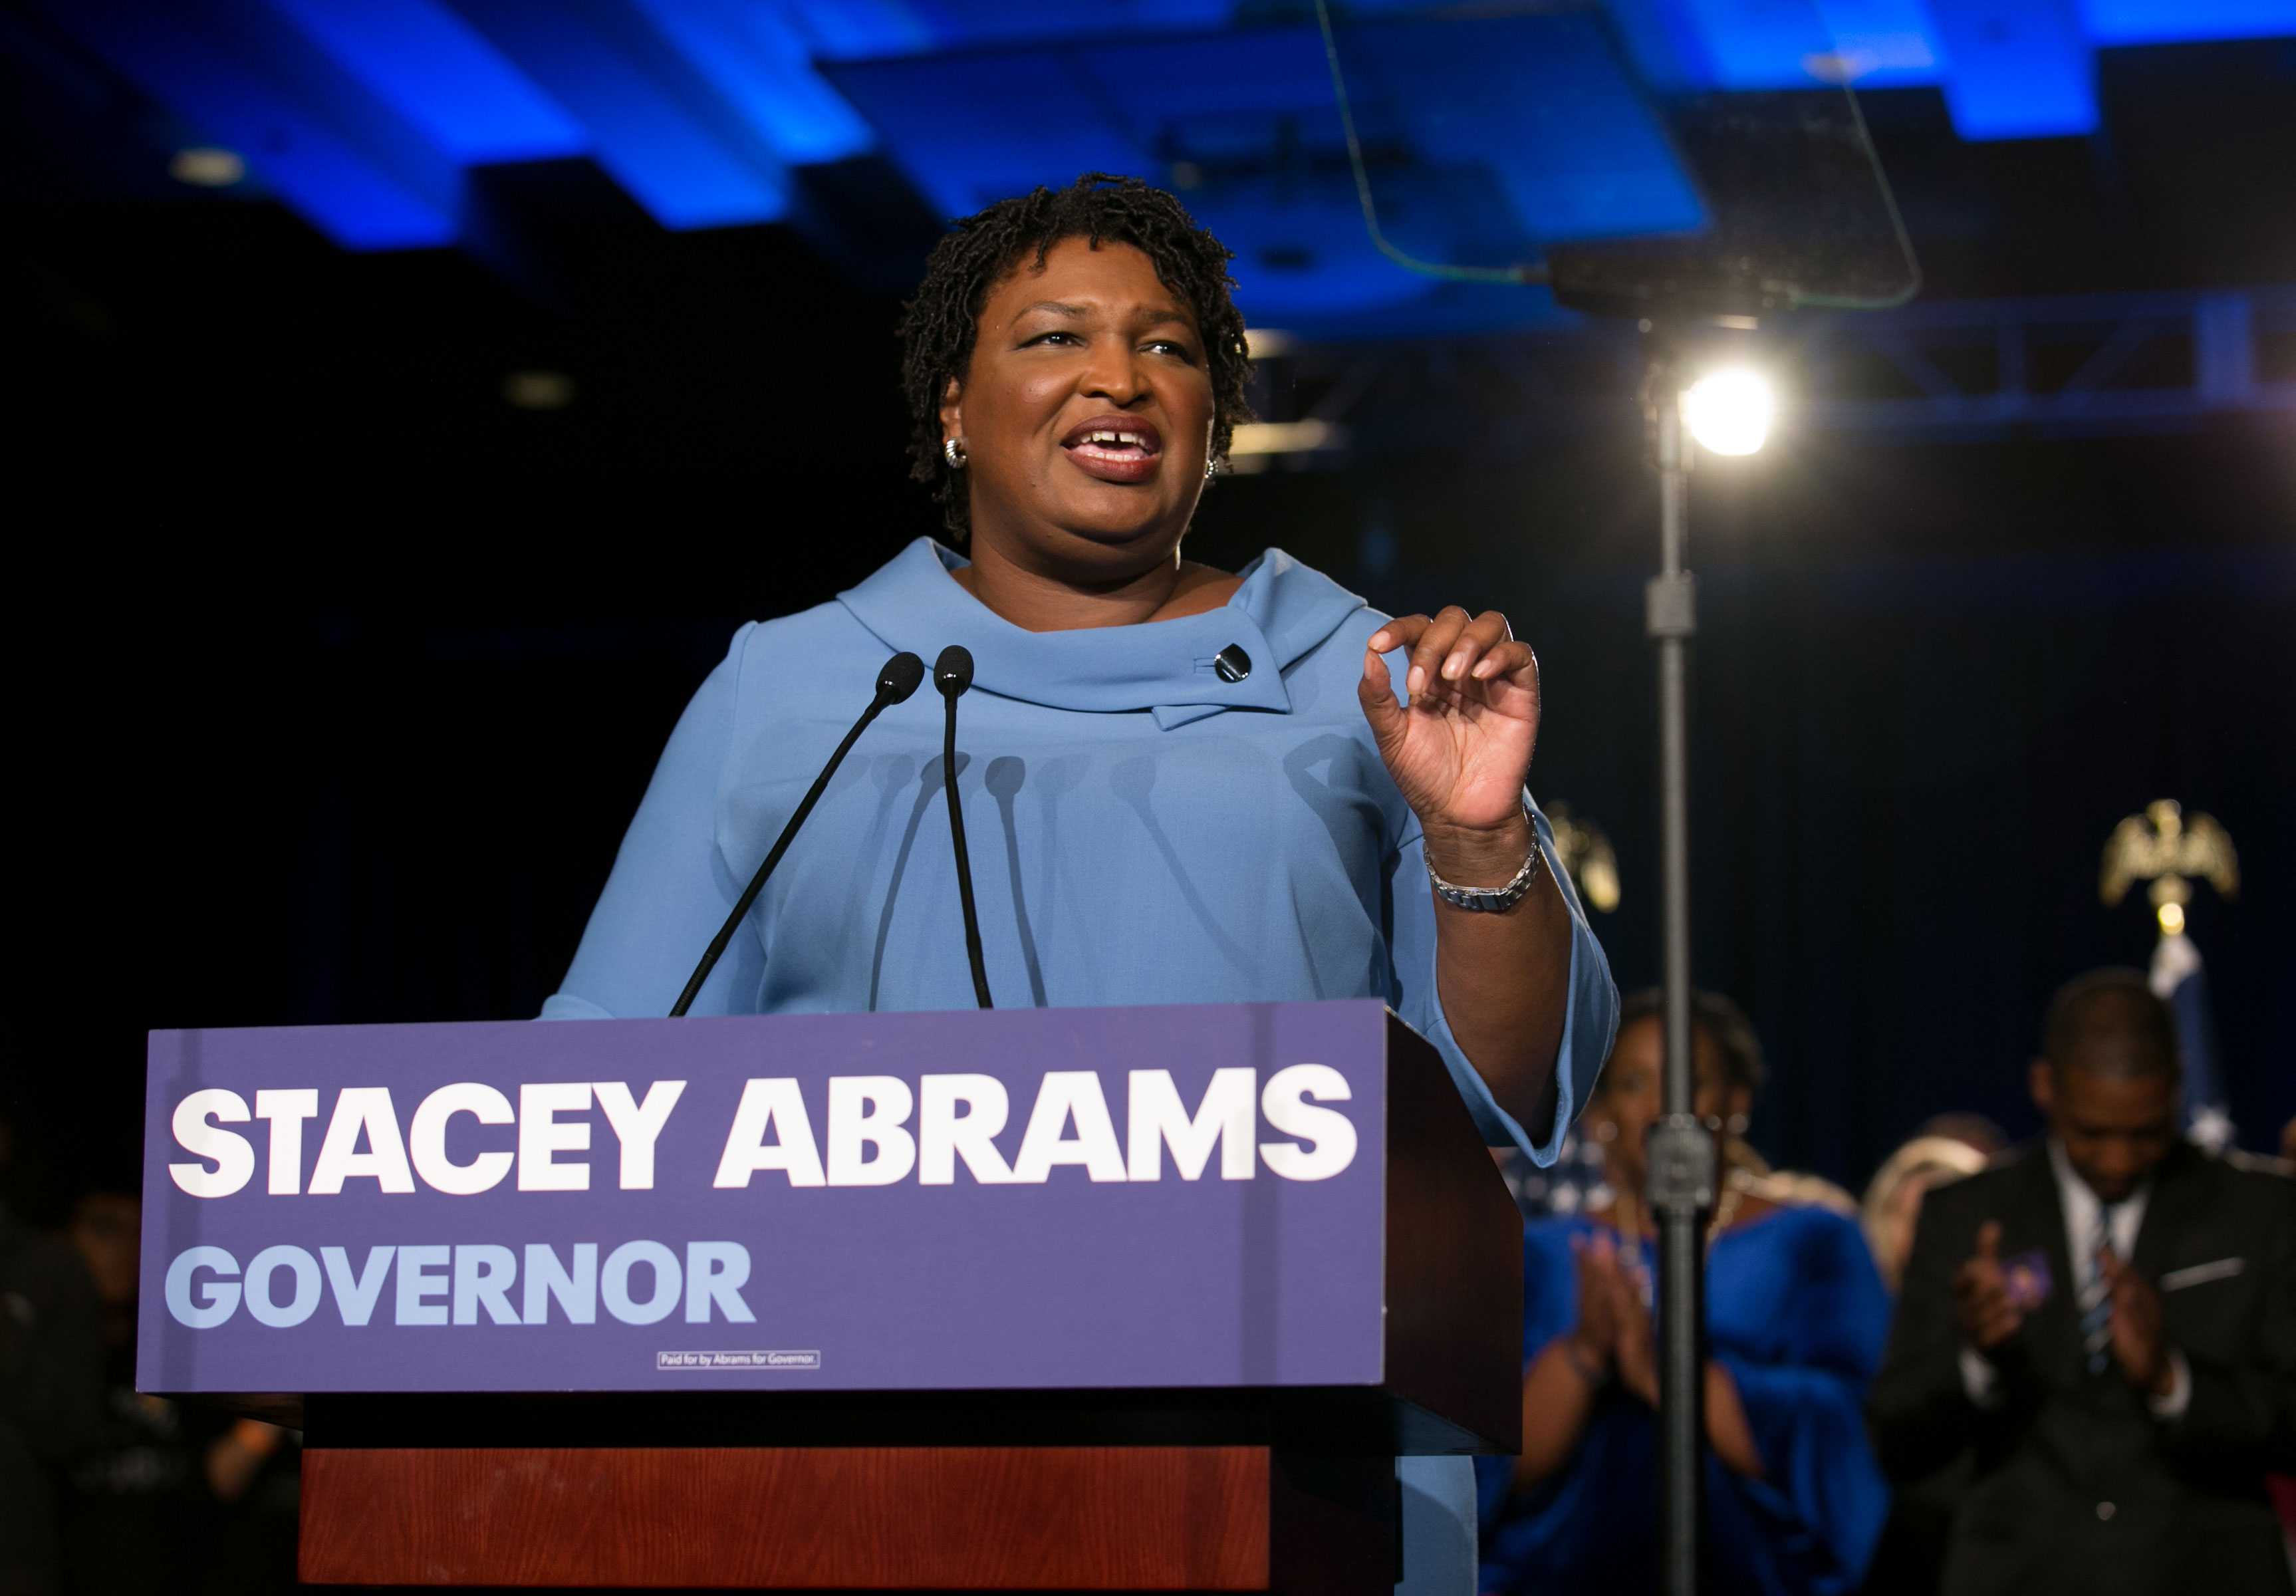 Stacey Abrams speaking behind a podium on election night. She is dressed in all blue.